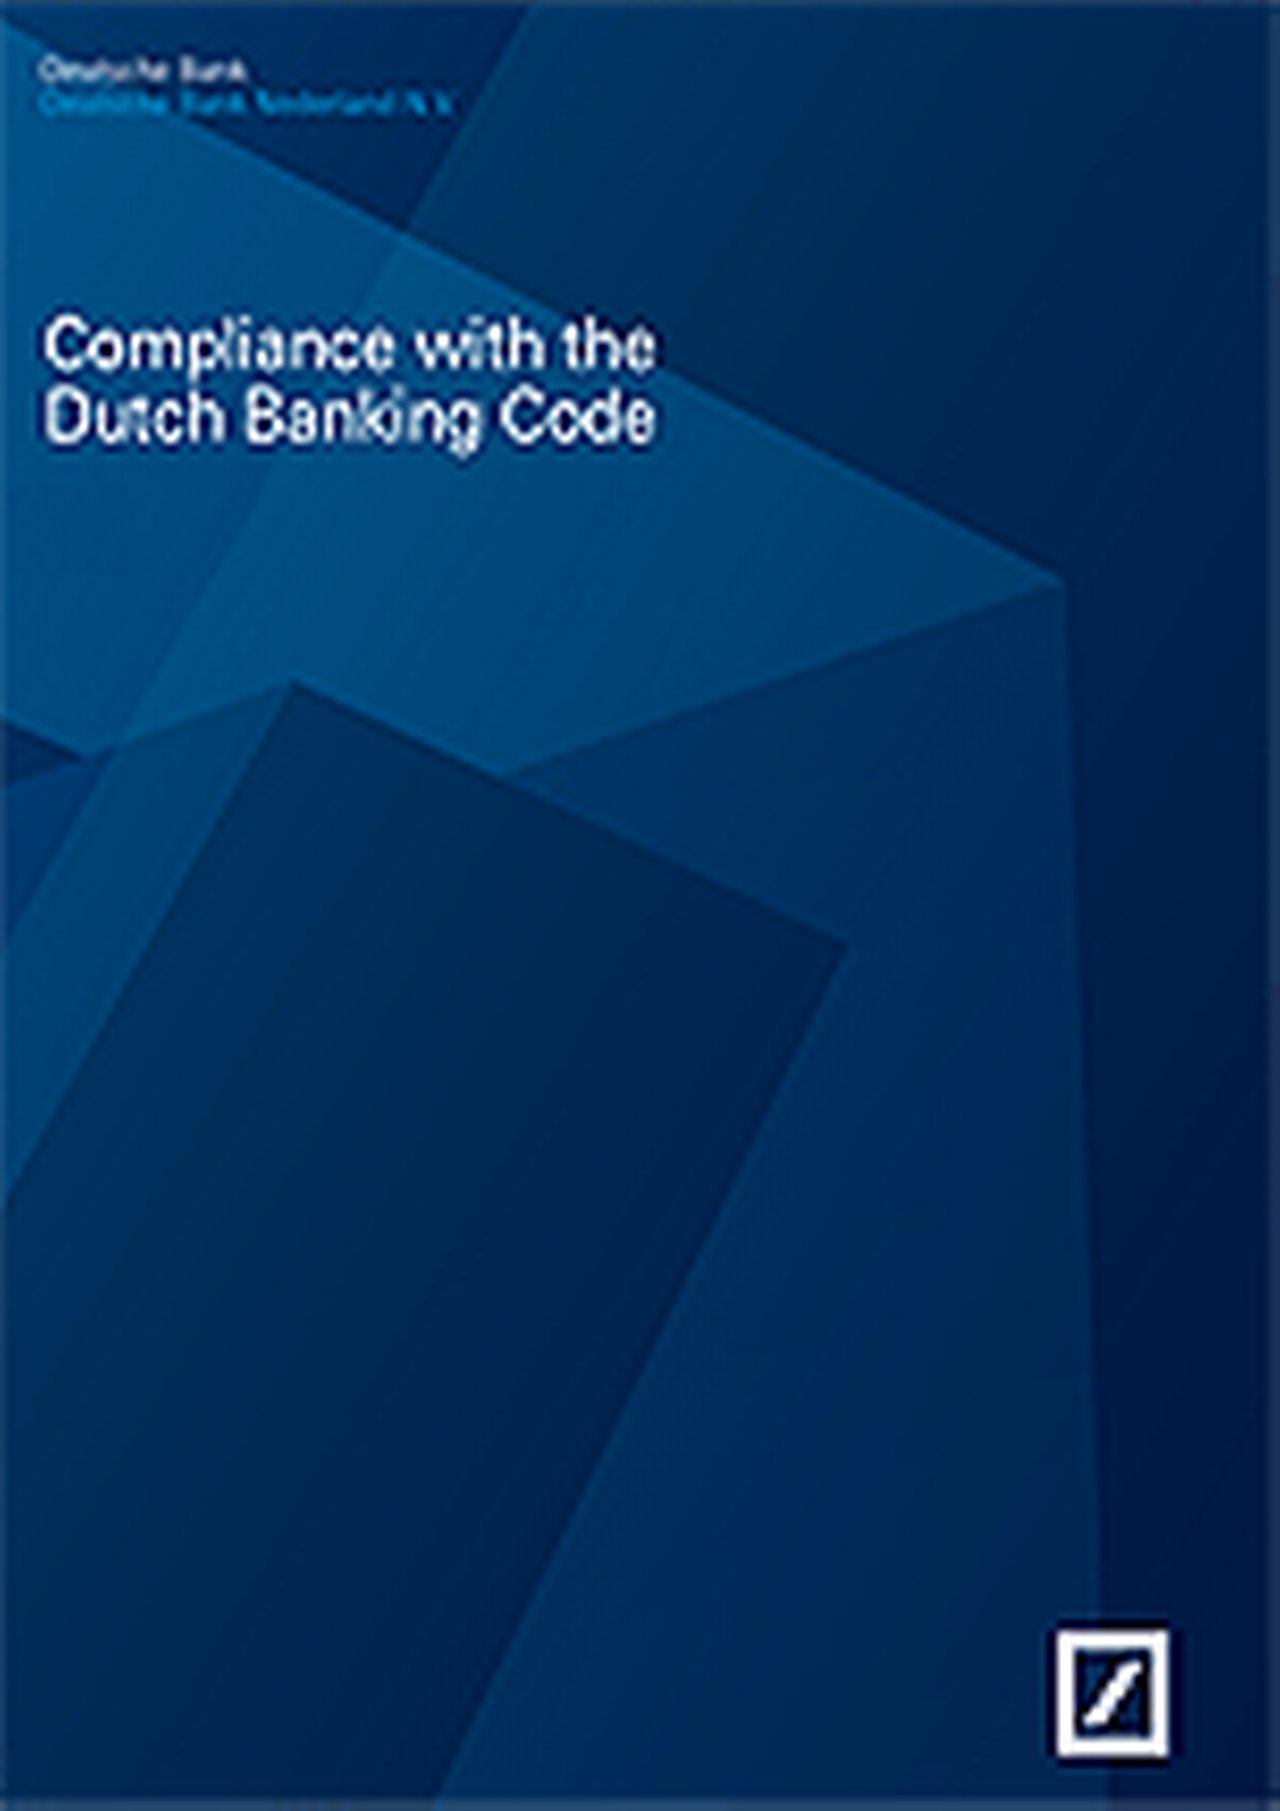 Compliance-with-dutch-banking-code.gif